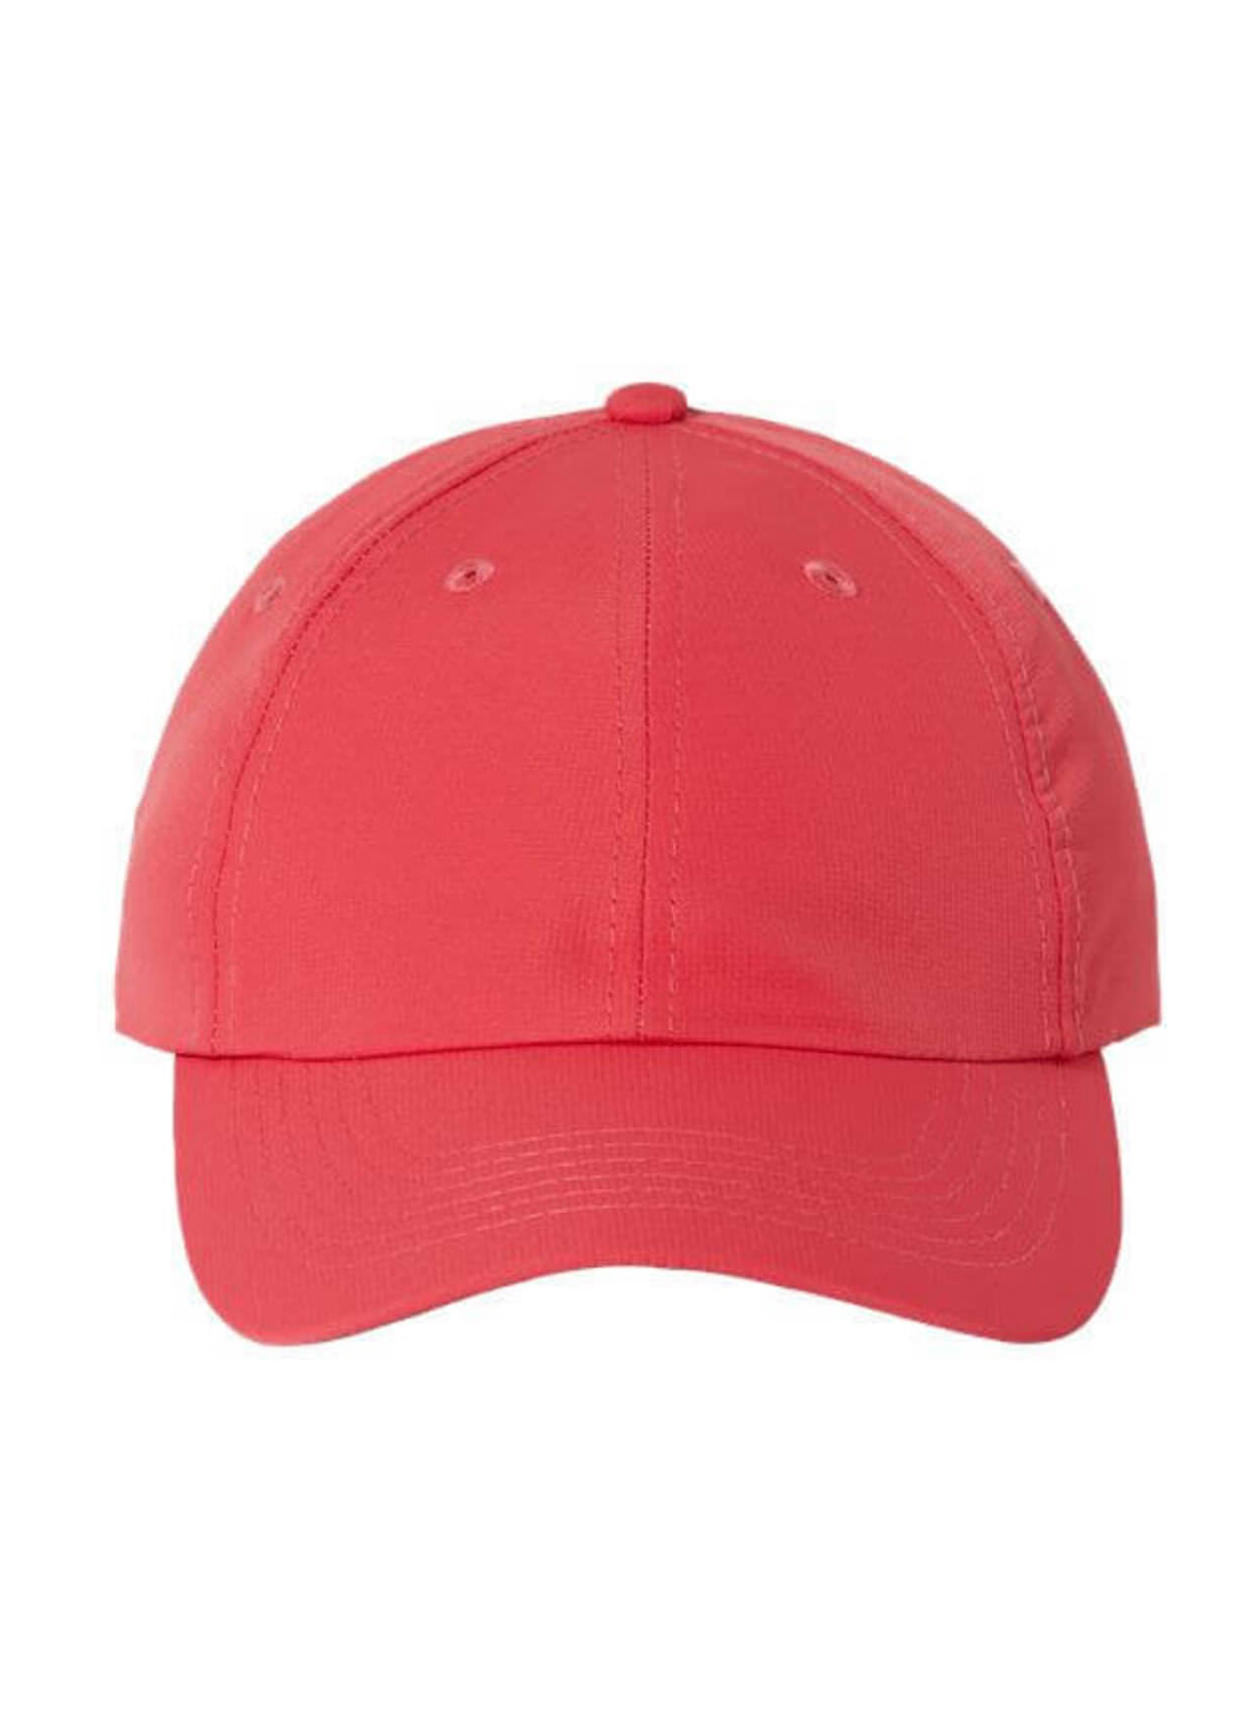 Imperial Red Pepper Original Performance Hat